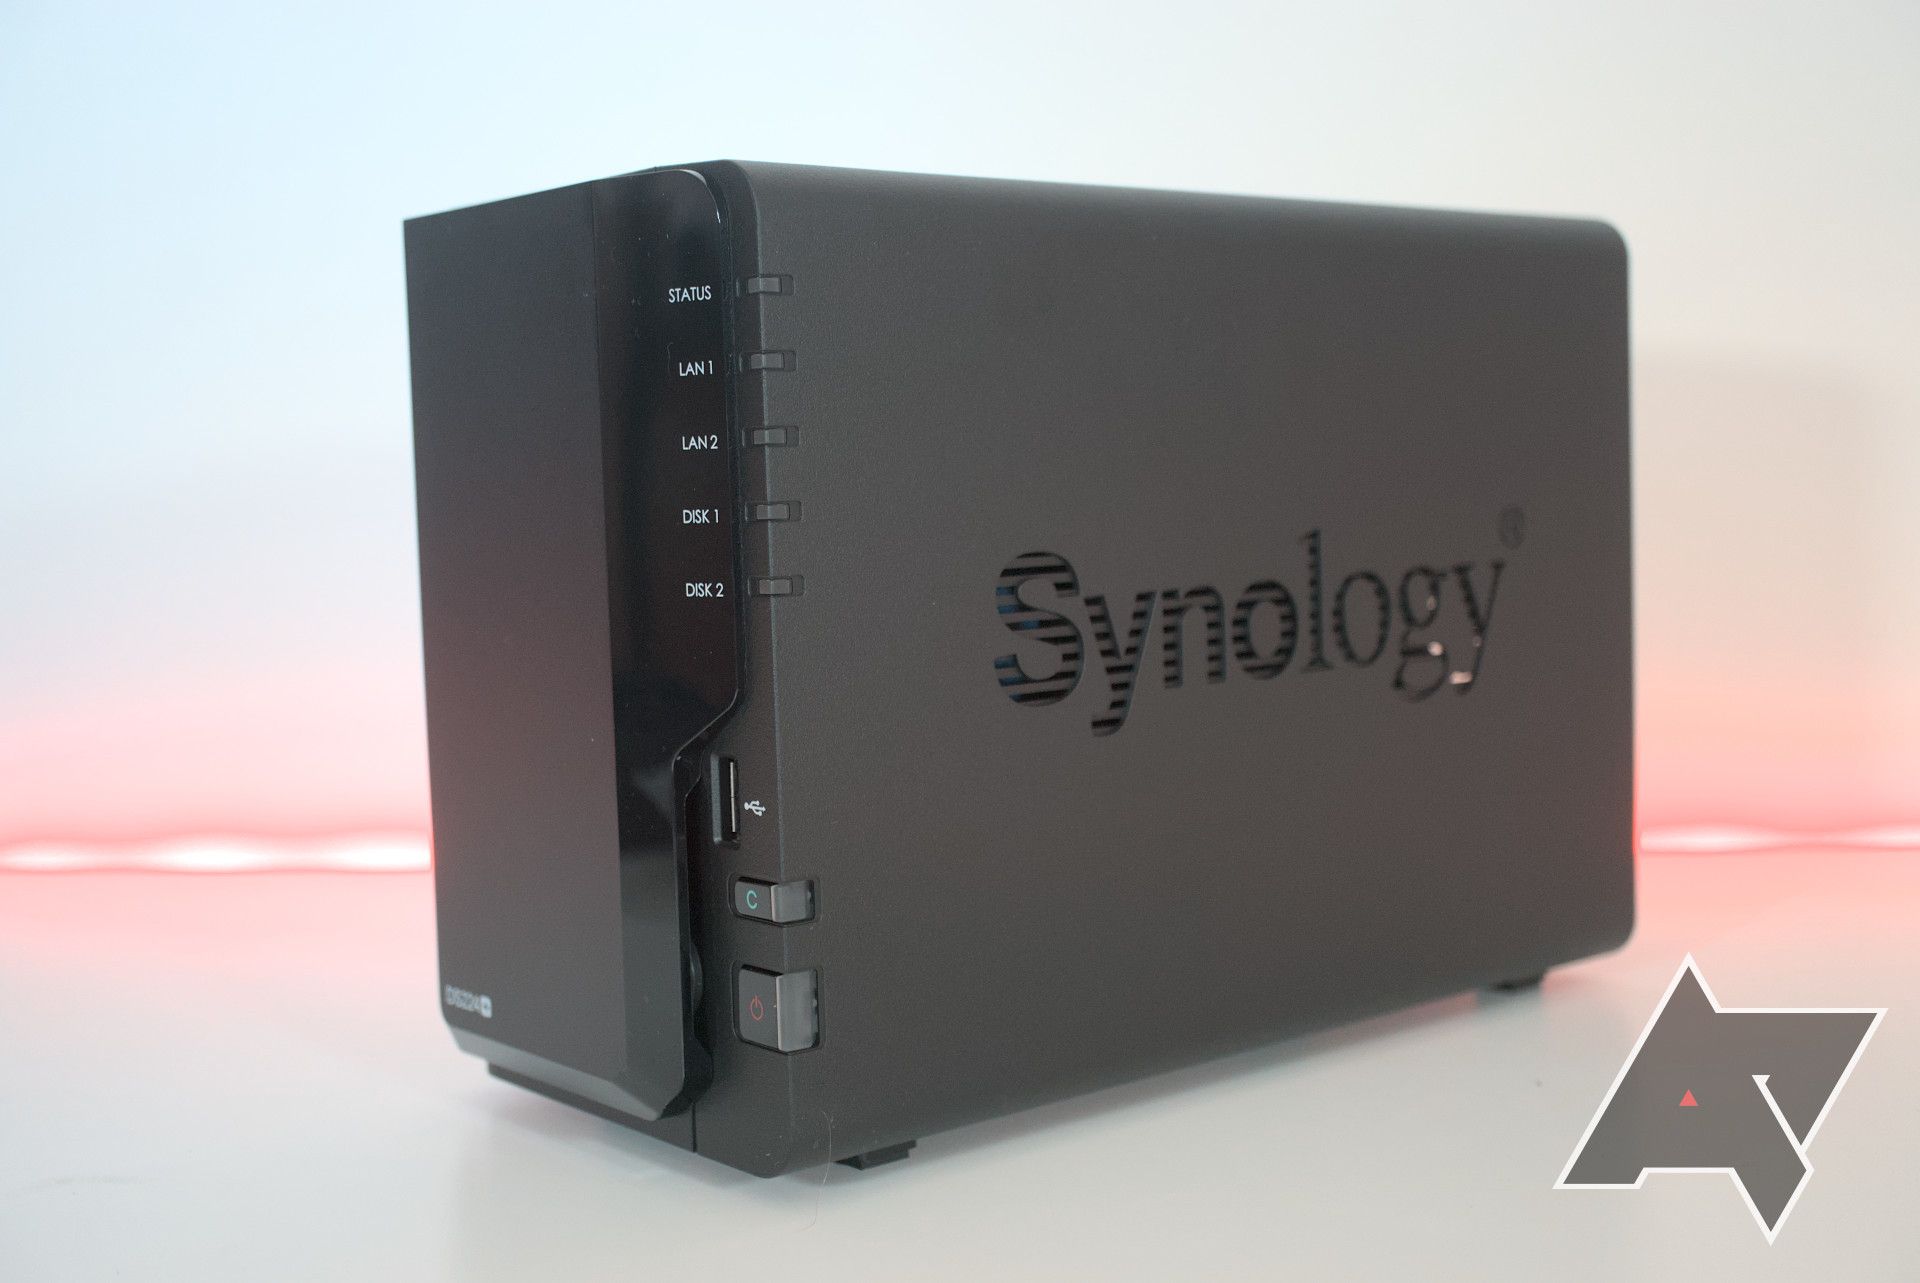 Showcasing the two-bay Synology DiskStation DS224+